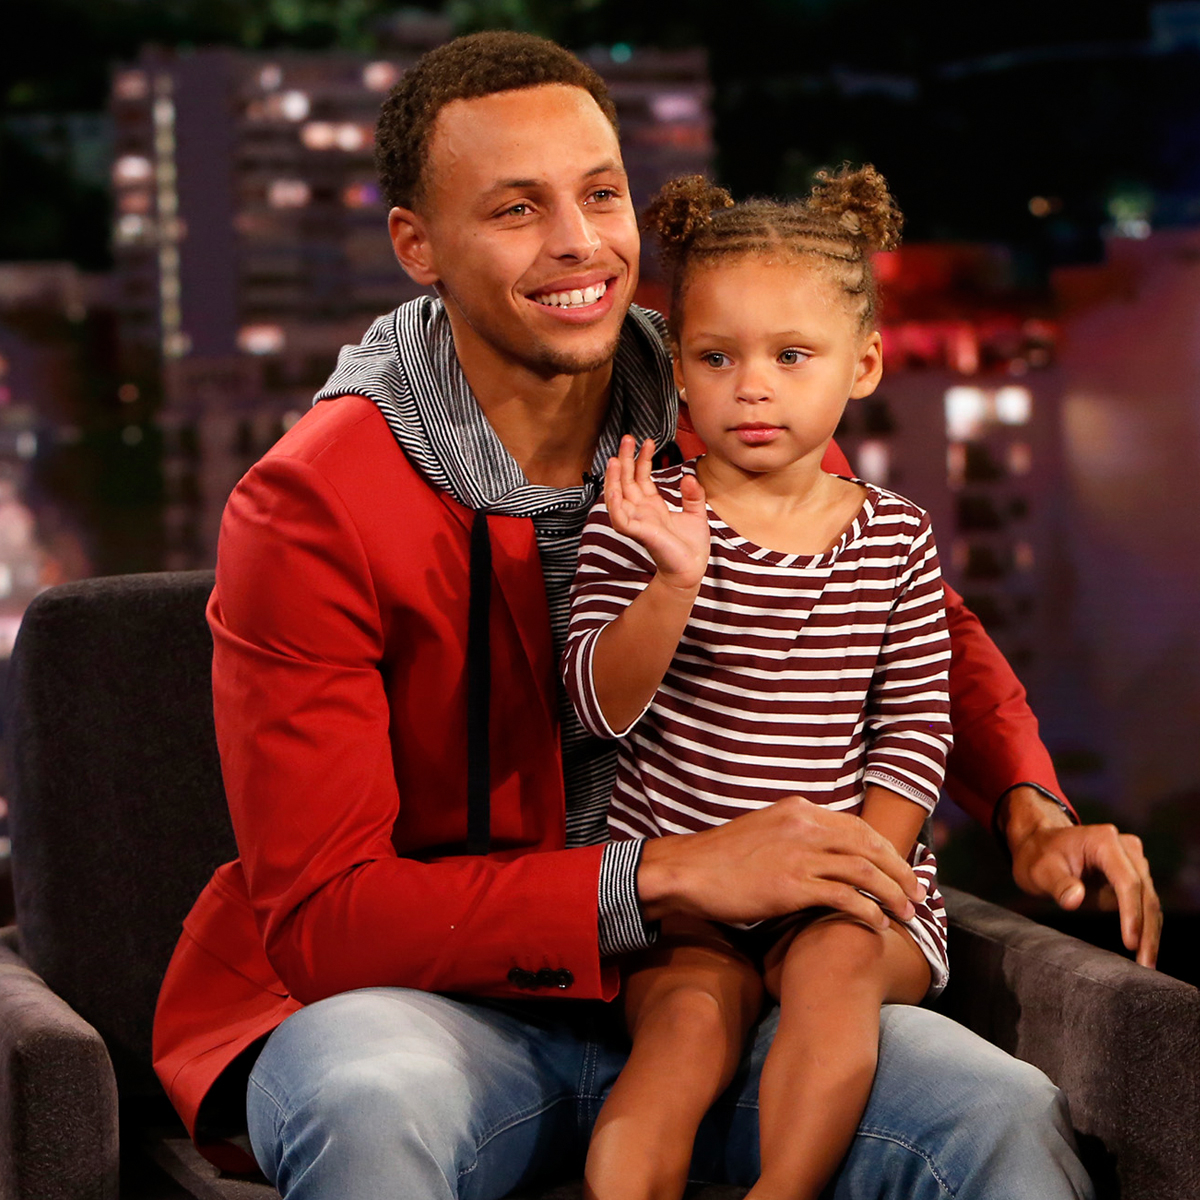 Riley Curry  Stephen curry pictures, Stephen curry family, The curry family